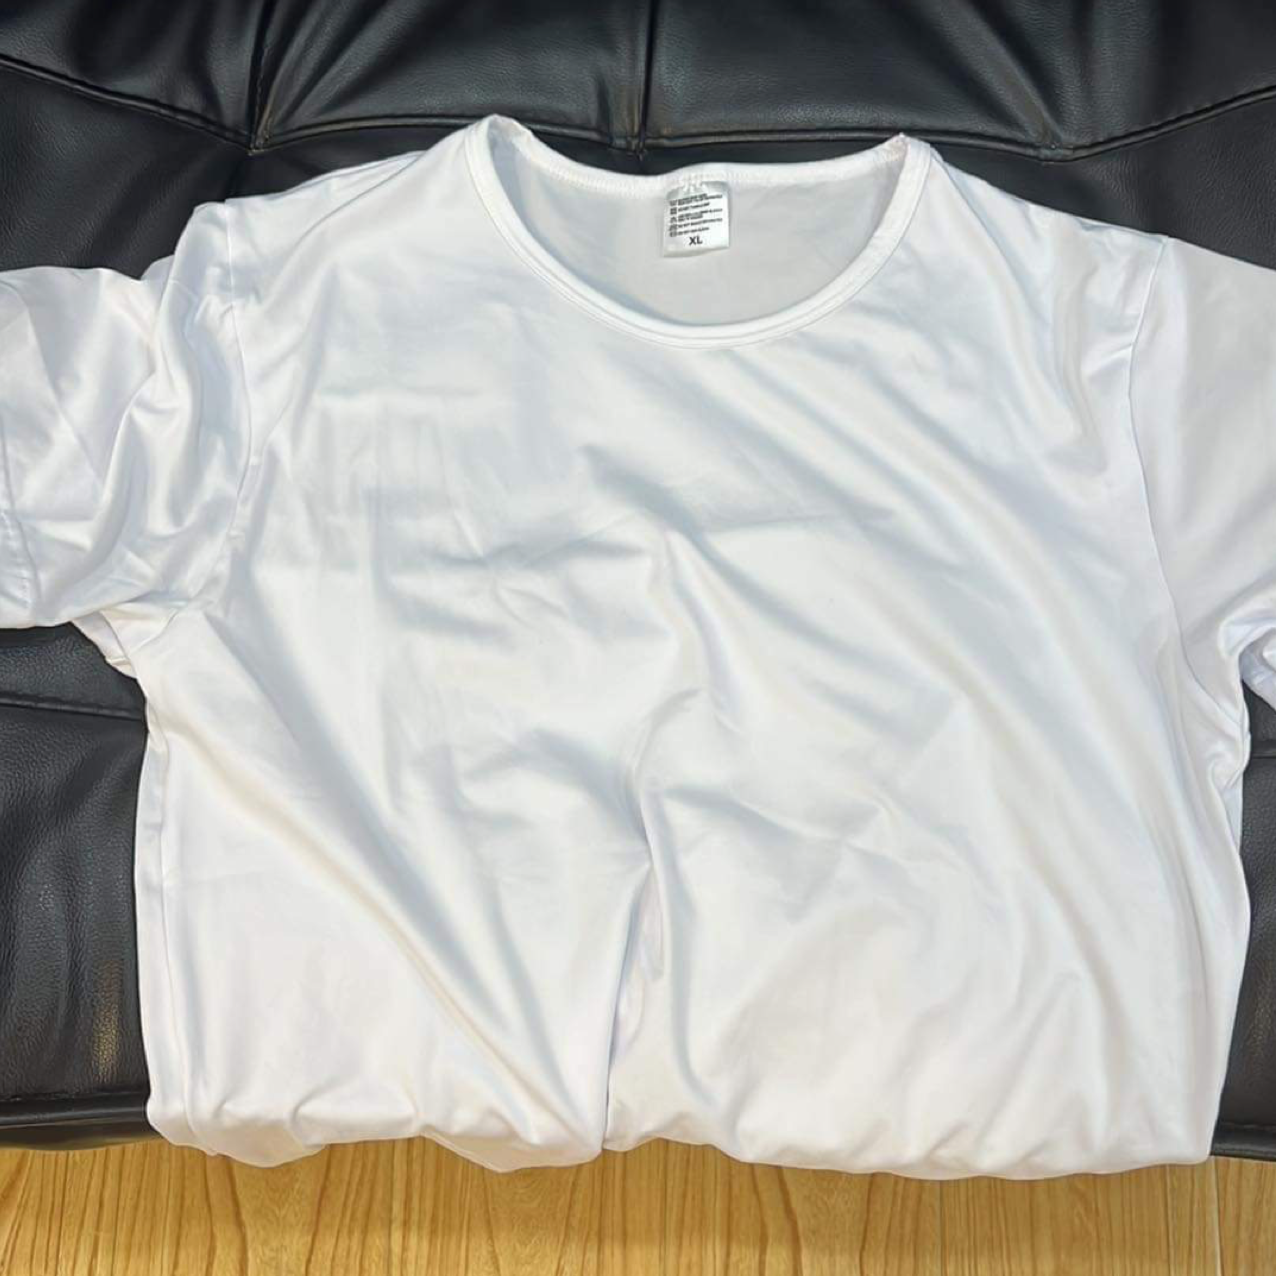 Sublimation T-Shirt Printing: 100% Polyester Blanks (White